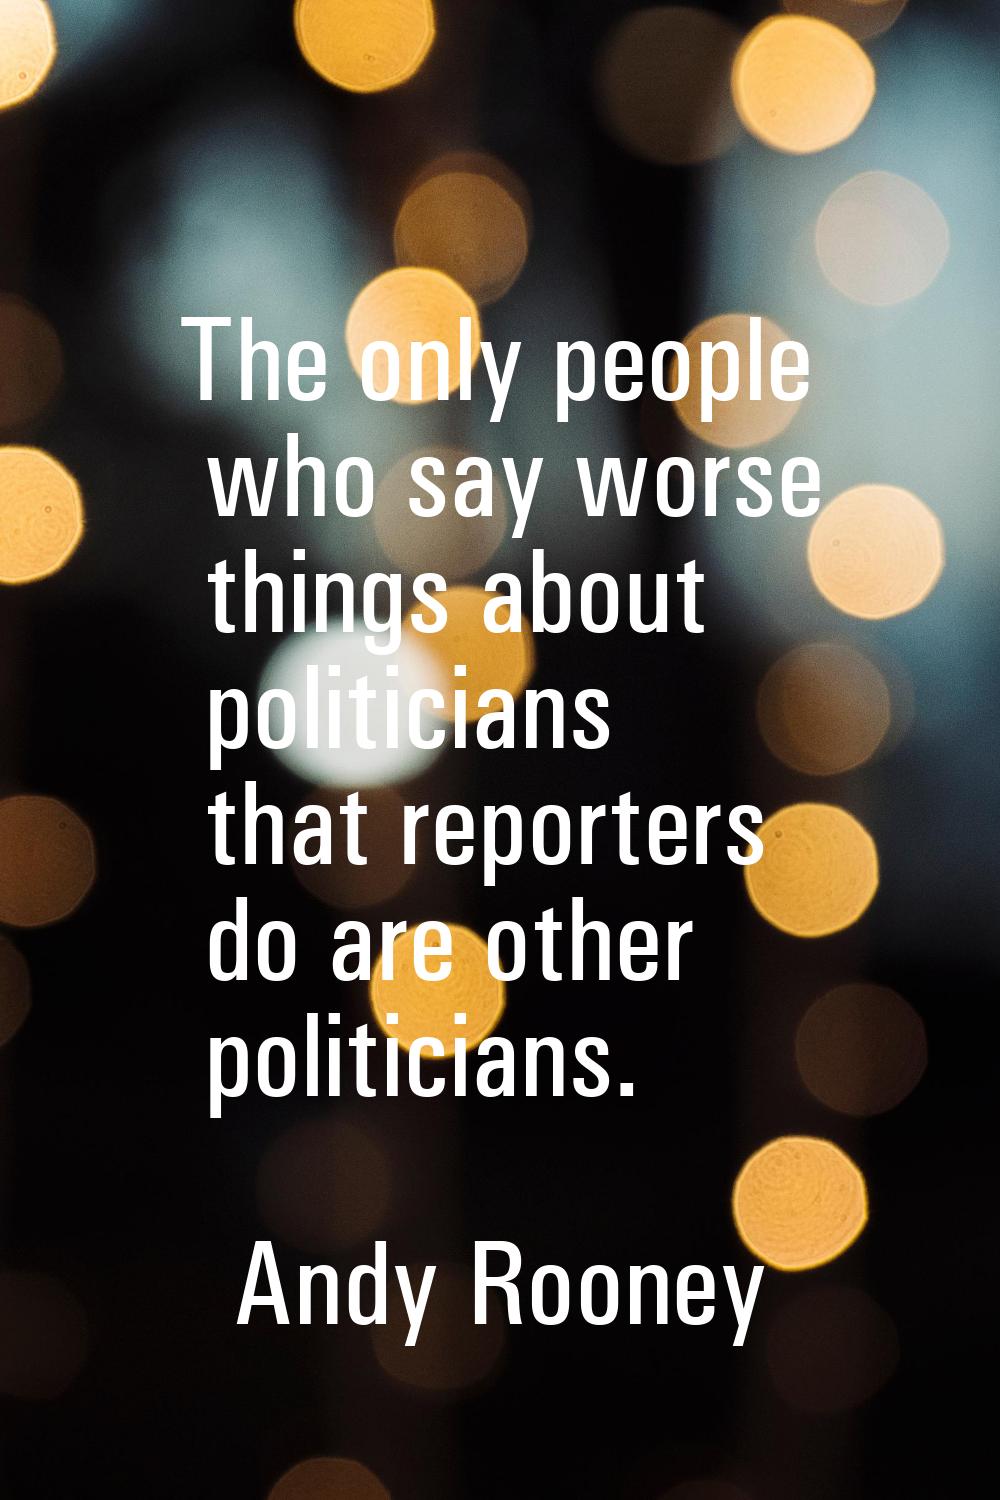 The only people who say worse things about politicians that reporters do are other politicians.